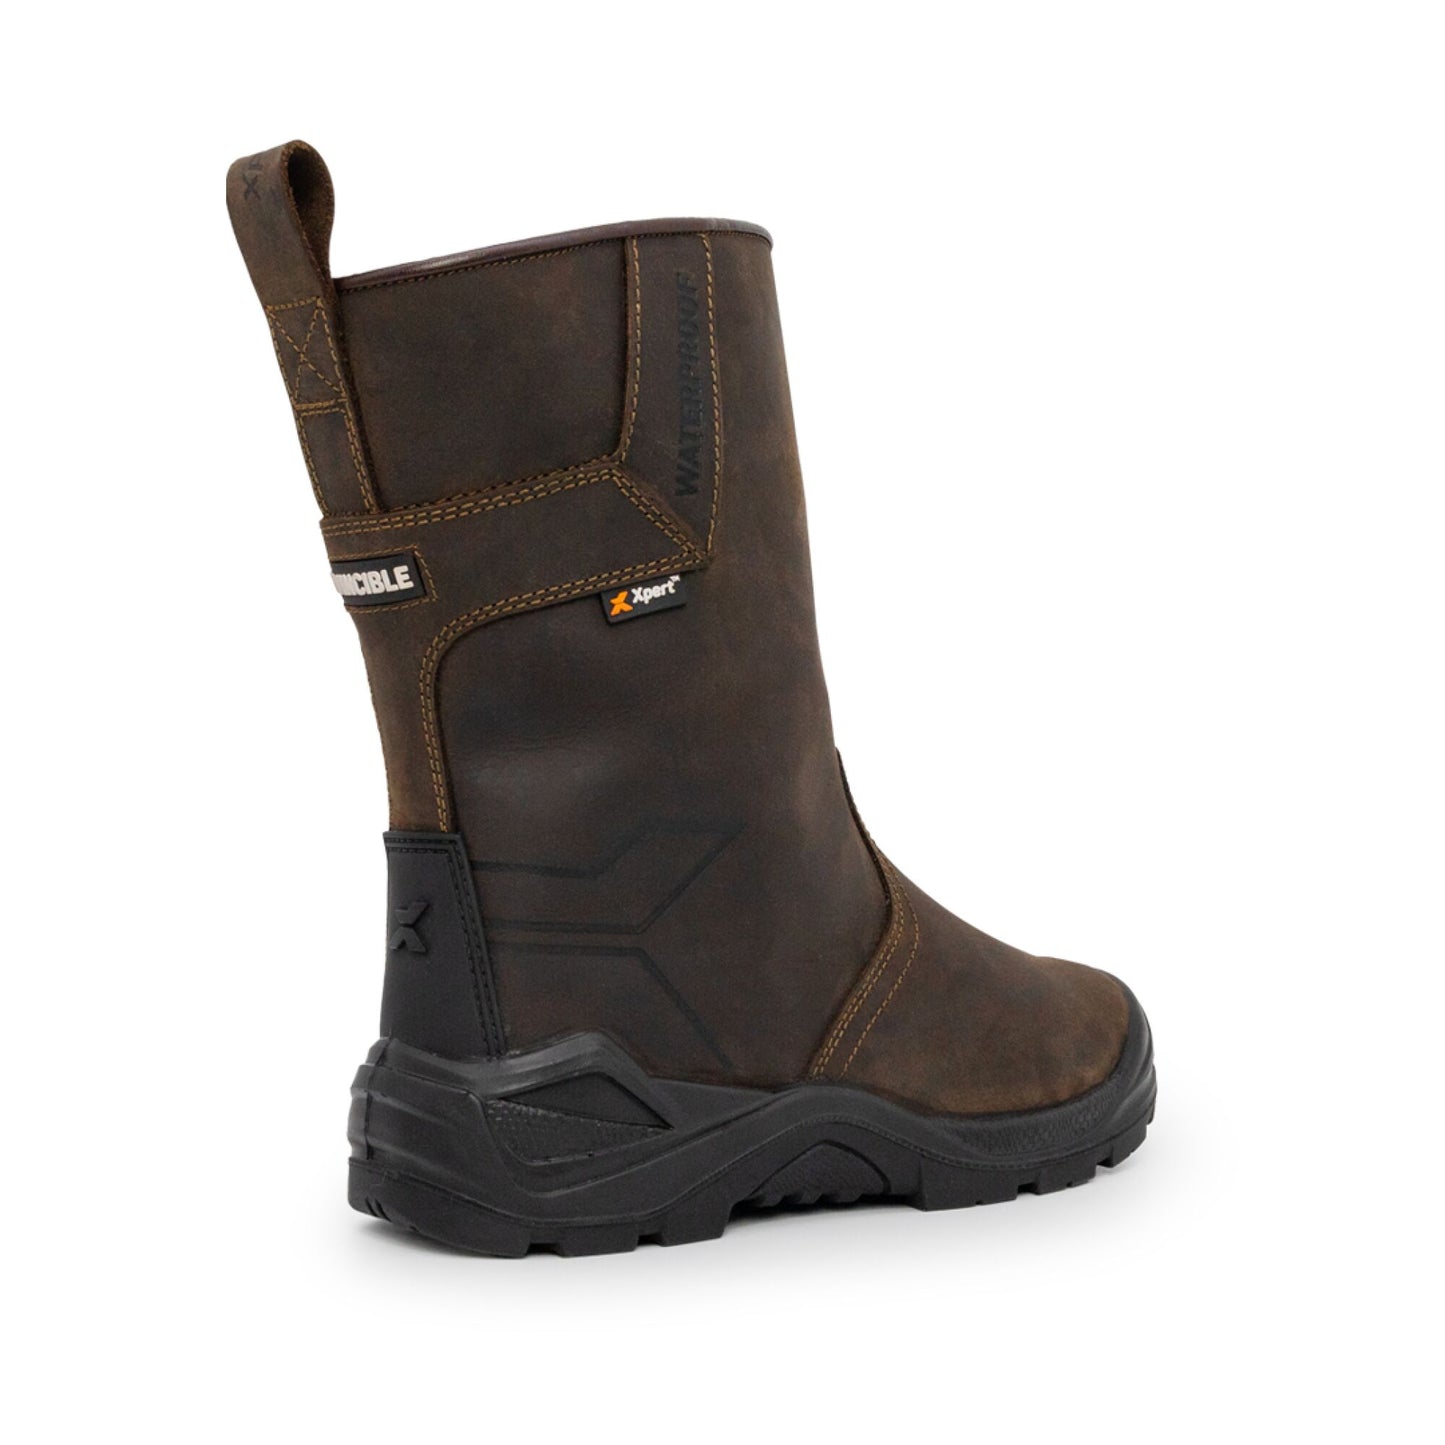 Xpert Invincible S3 Safety Waterproof Rigger Boot - Brown